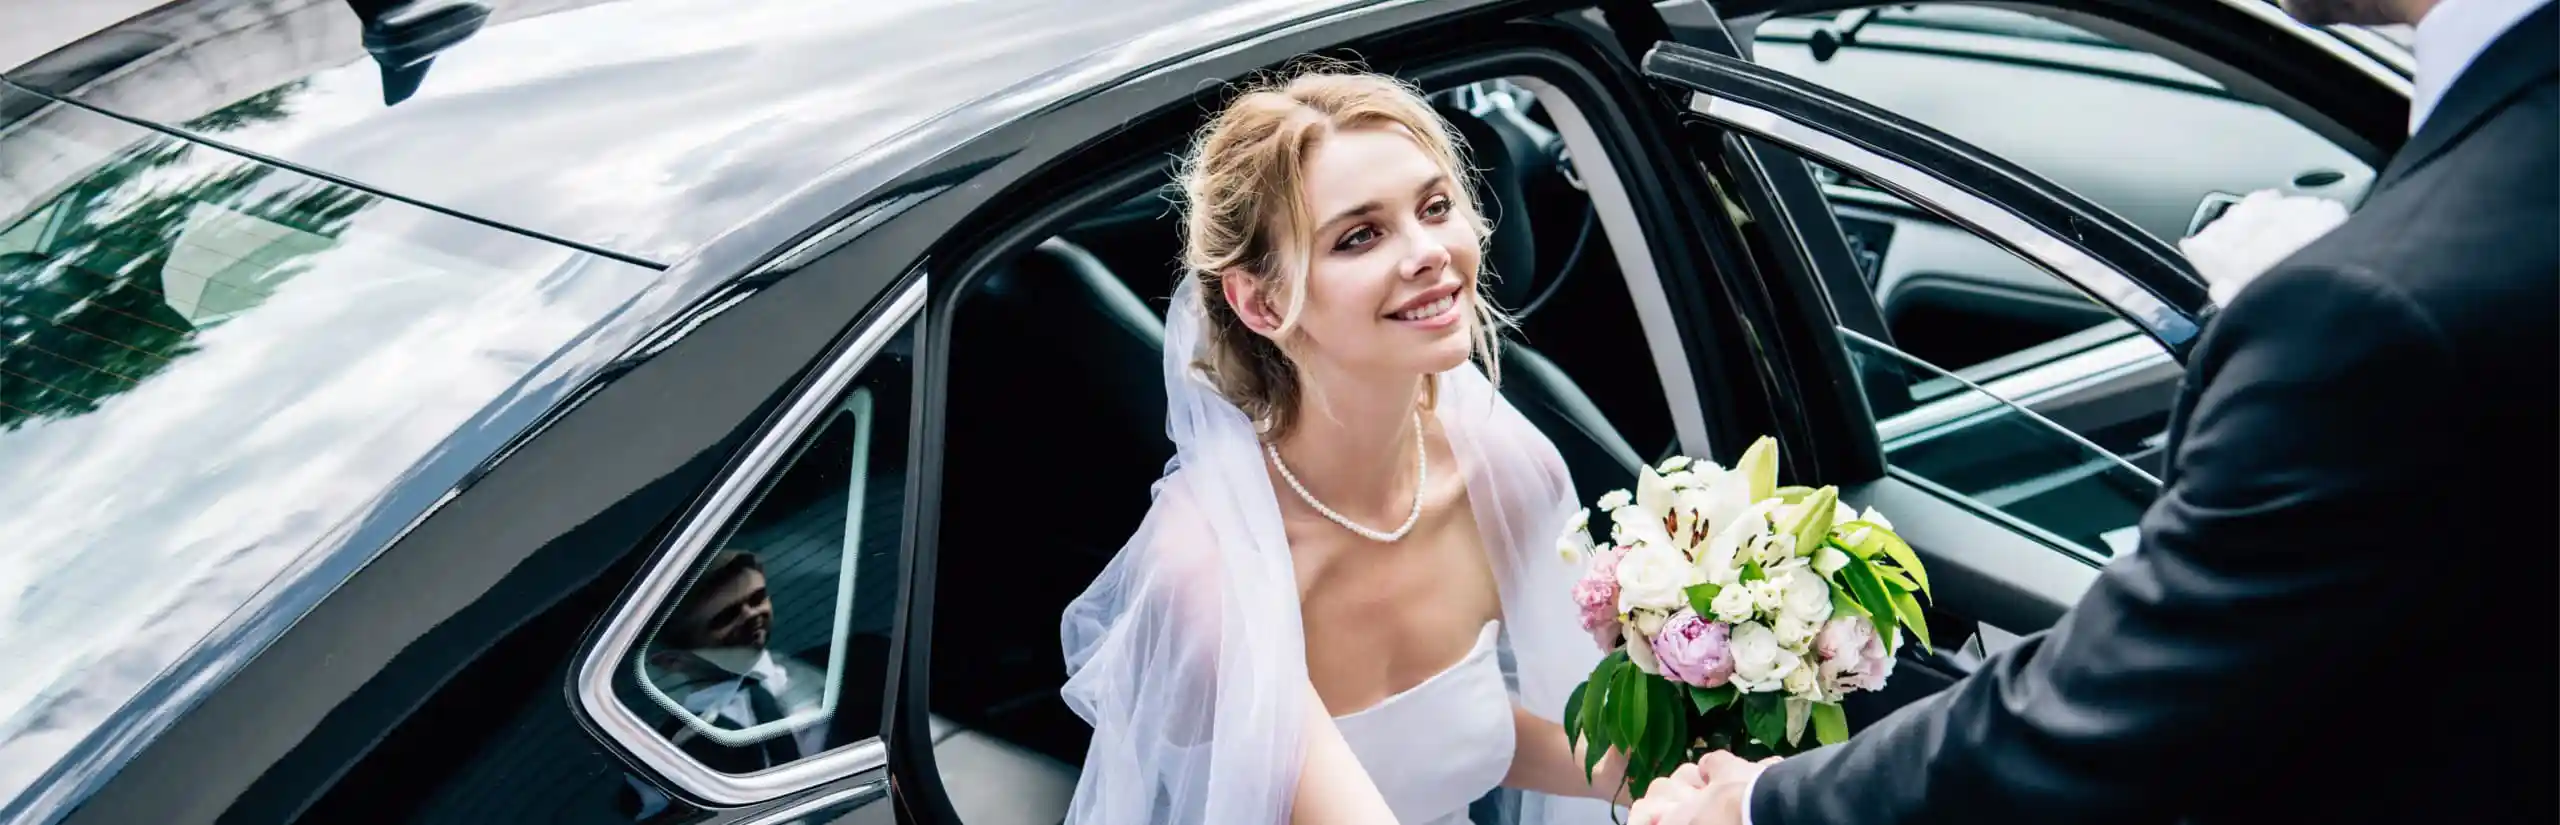 Wedding limousines for hire